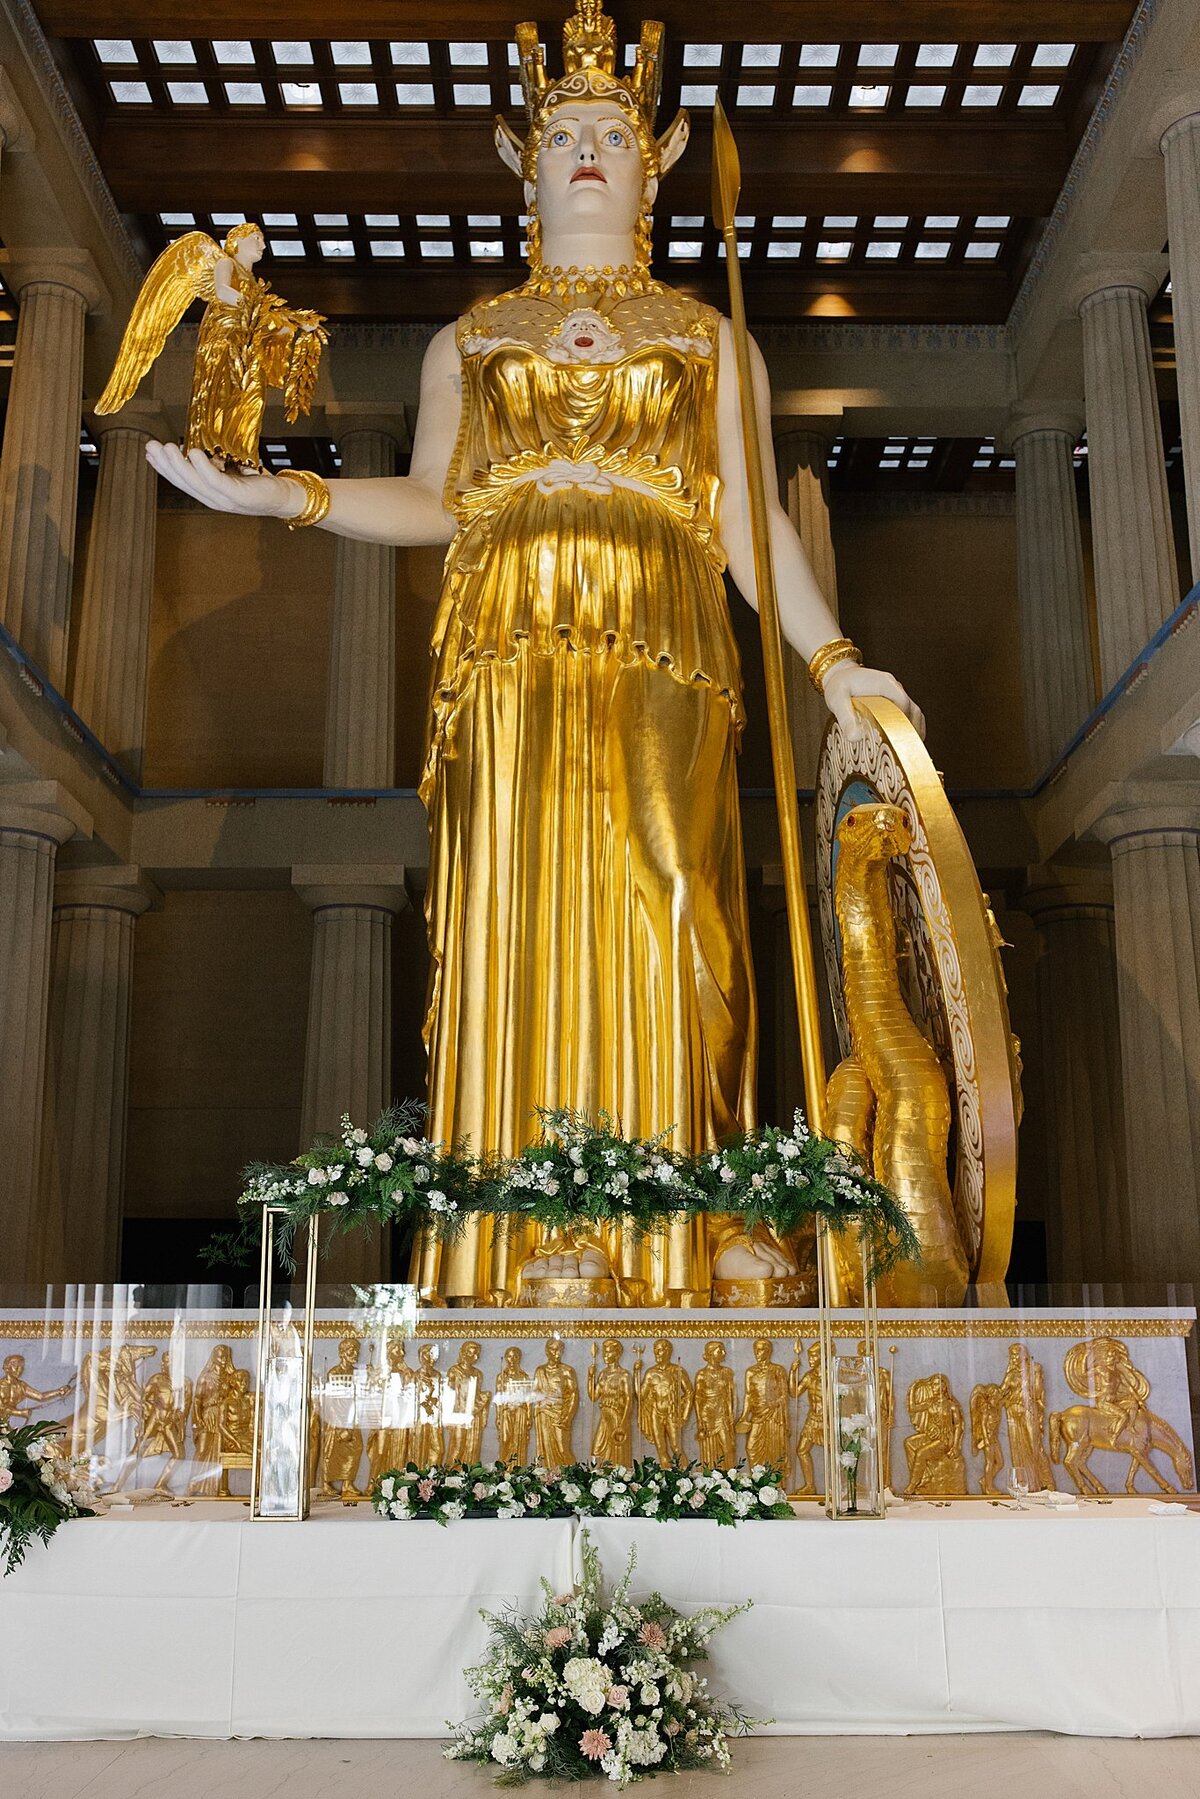 The Athena Statue at The Parthenon in Nashville behind a head table set for a wedding party with white and blush flowers below the table, white and blush flowers on the table and a canopy of flowers above the table on a clear acrylic stand.